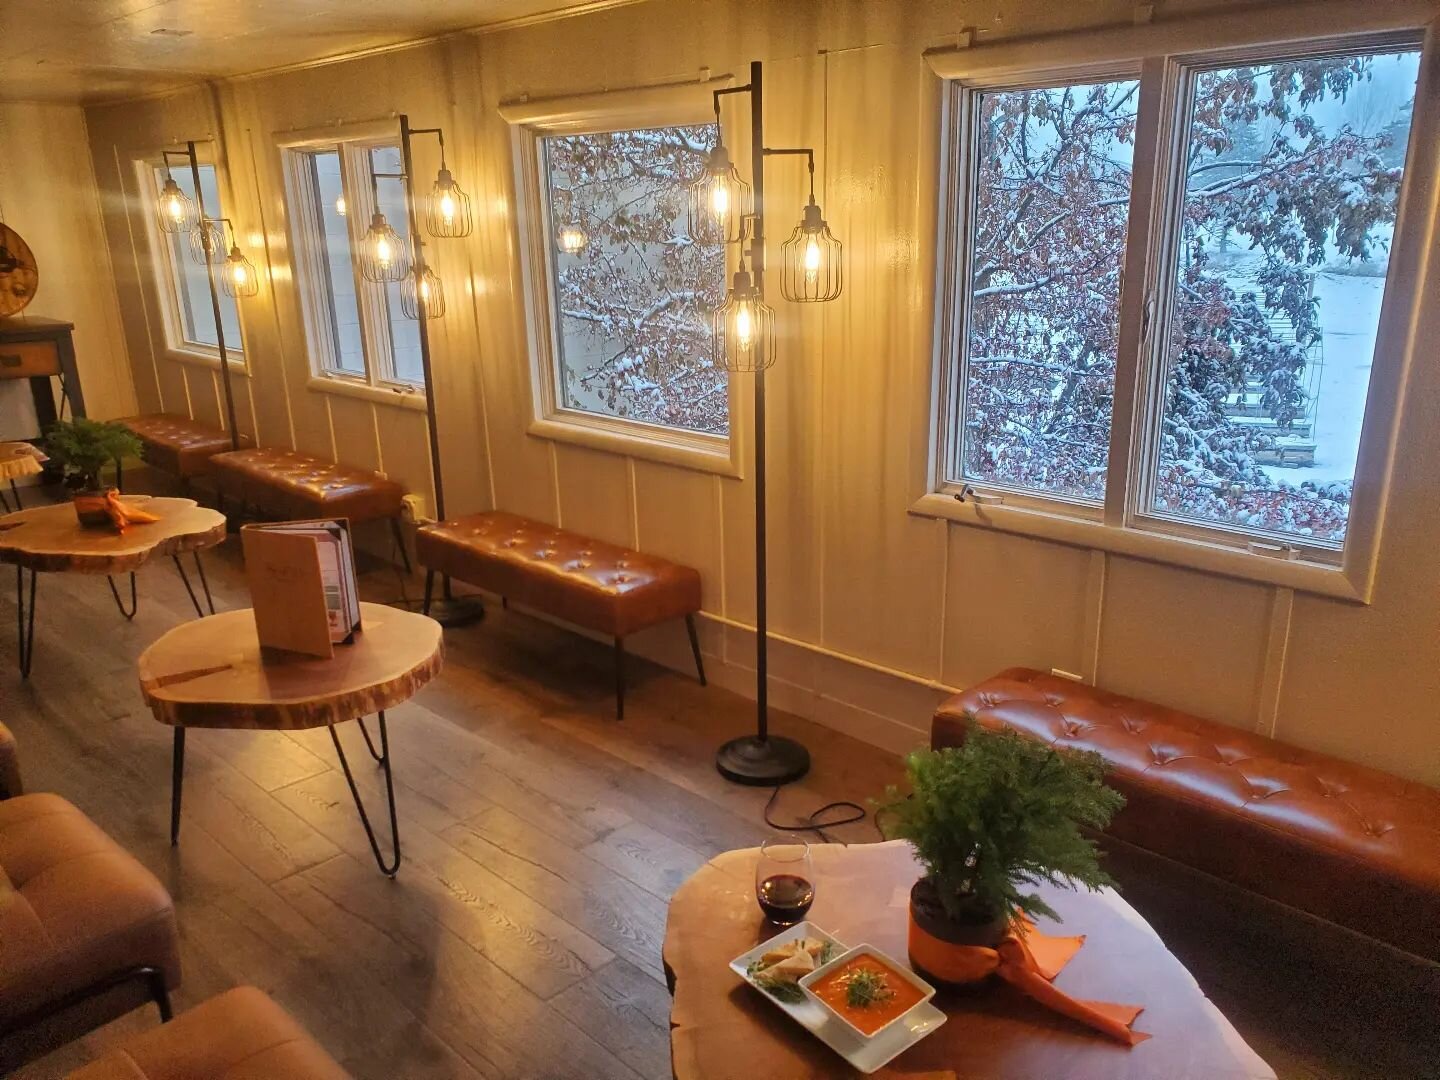 With snowfall forecasted for the next few days, why don't you come warm up with this beautiful view, a hot soup, and glass of wine?

Don't go crazy getting stuck in the house, we've got you covered. Bring your favorite book (and leave it if you'd lik